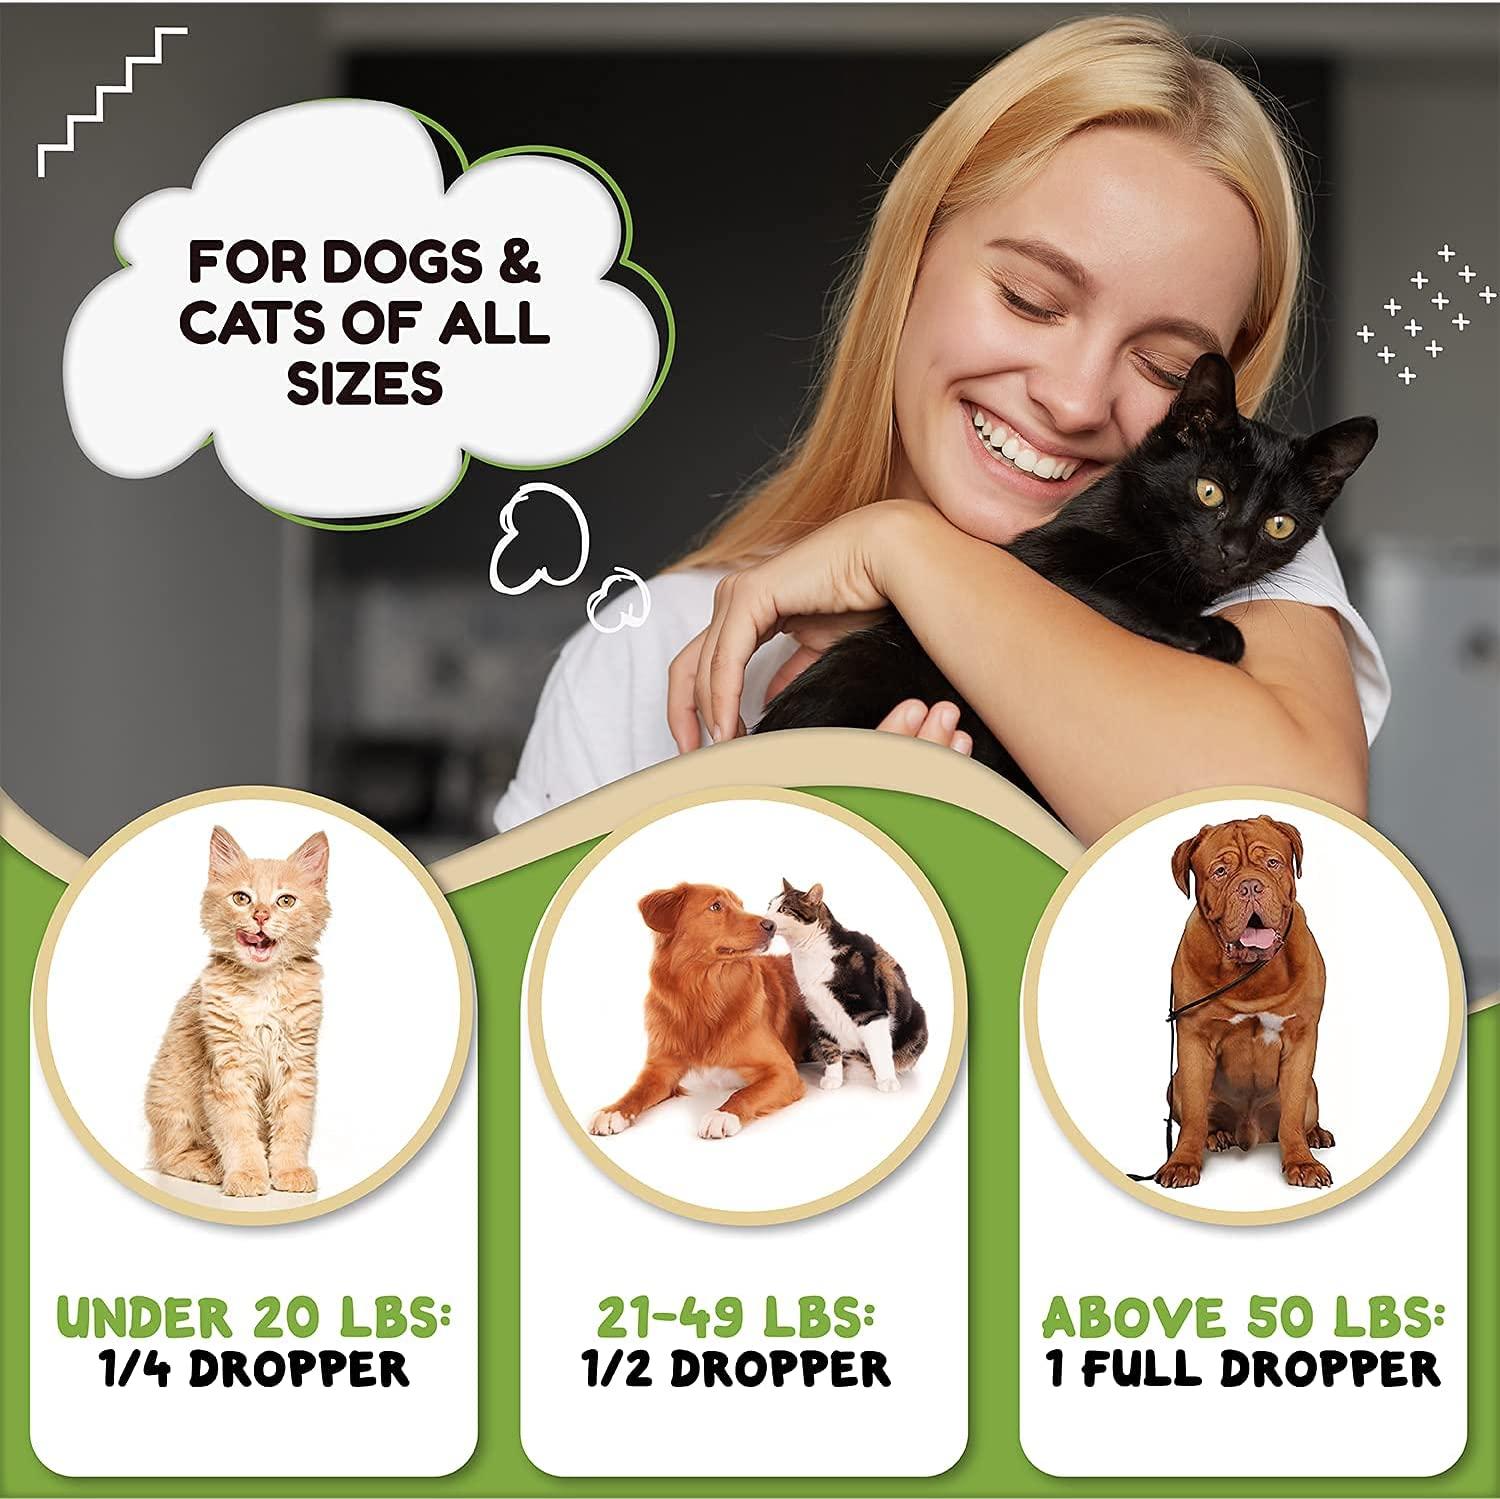 Pet Droppers (set of 2)  Vet Worthy Dog and Cat Wellness Products